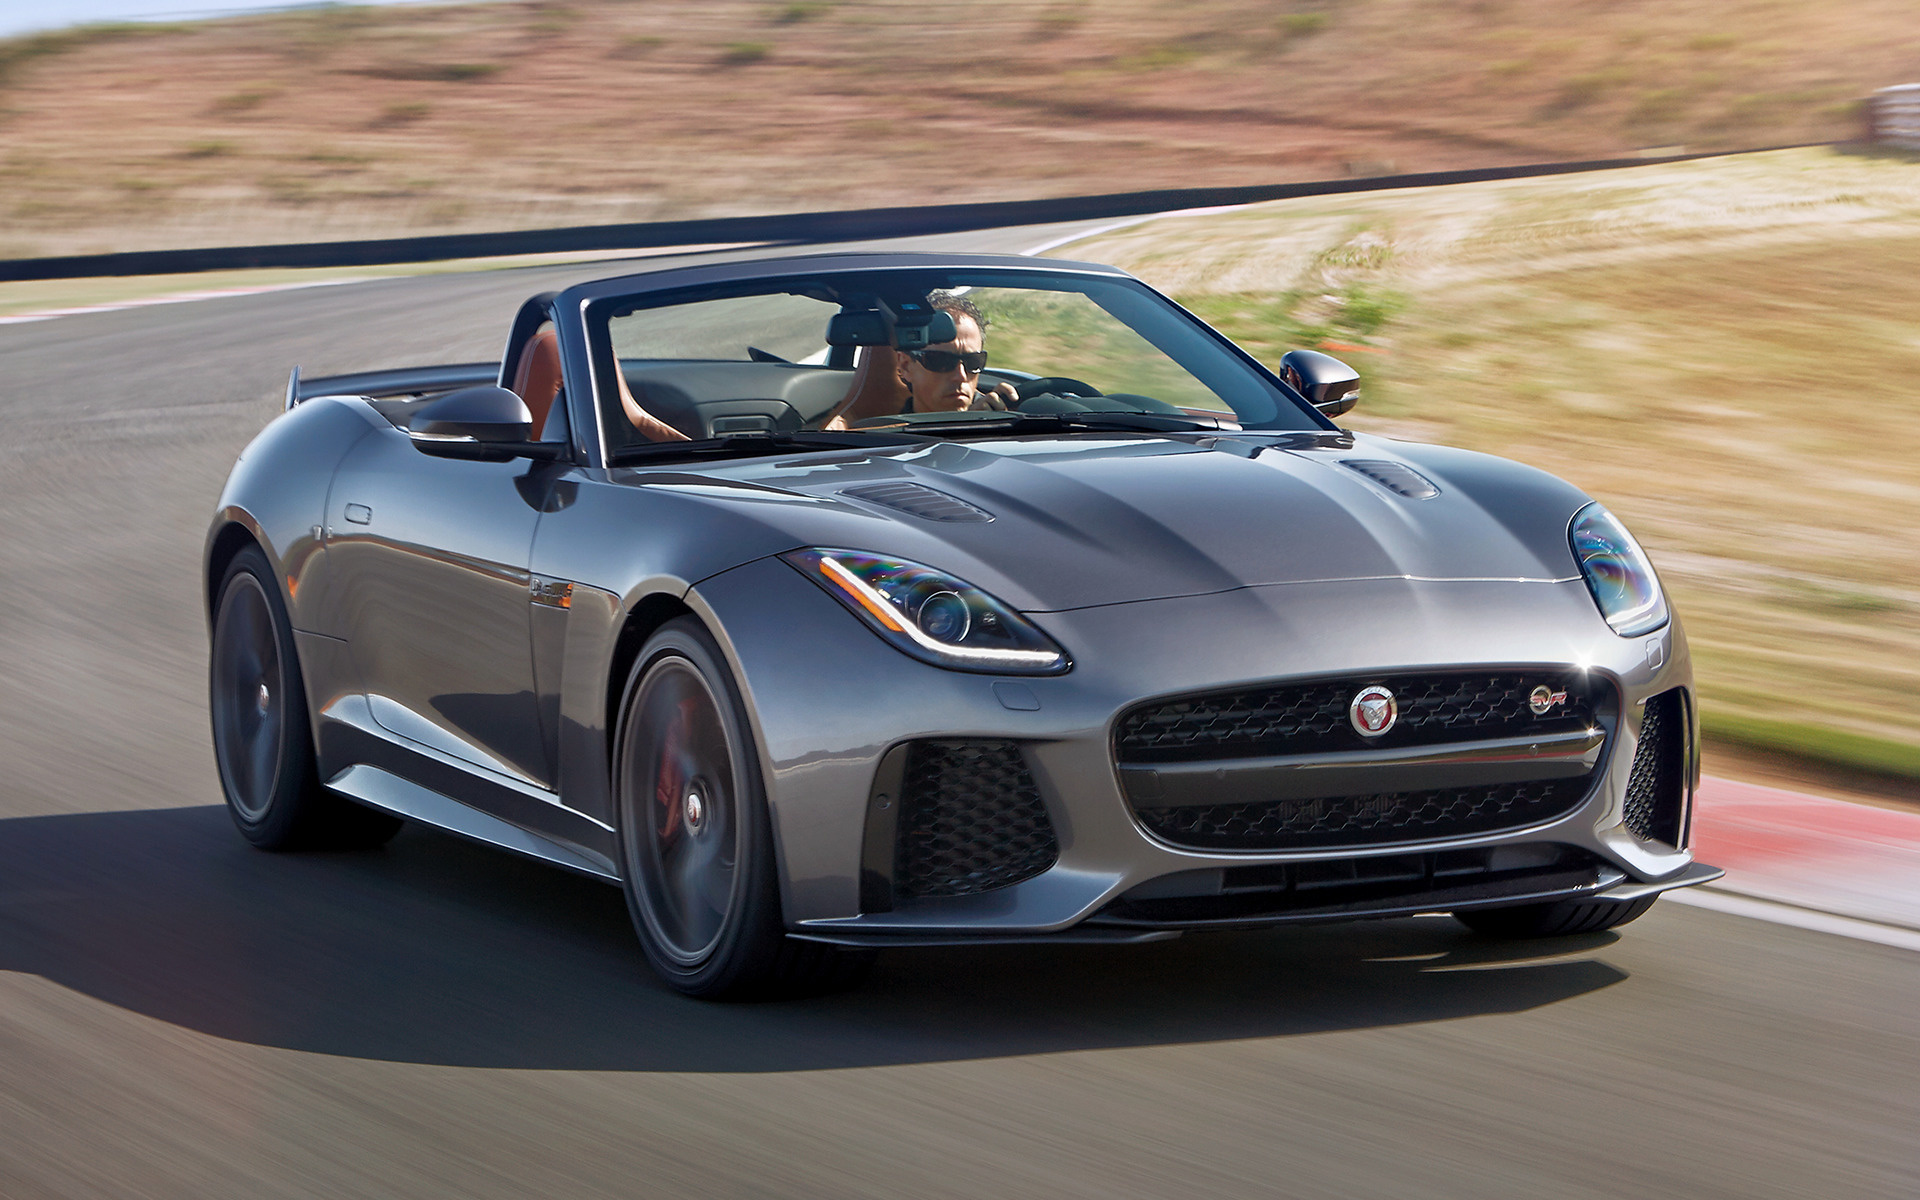 2016 Jaguar FType SVR (US) Wallpapers and HD Images